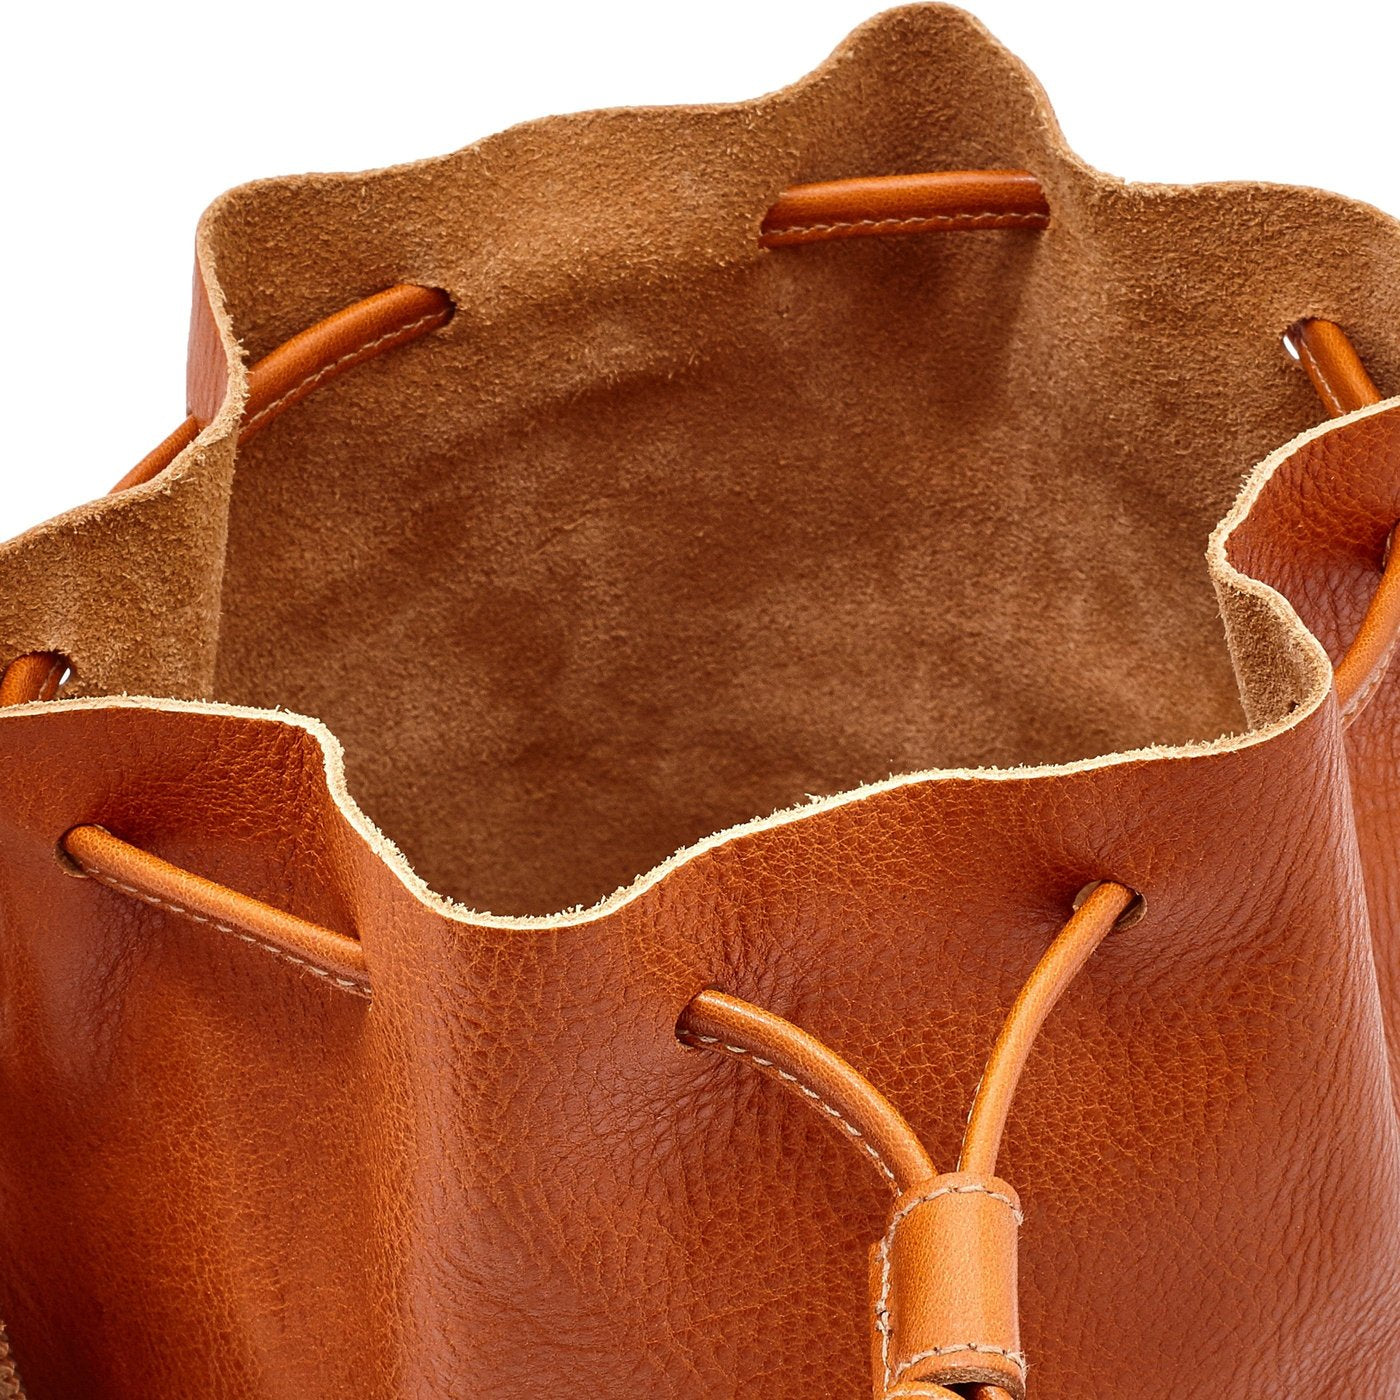 Silvia | Women's bucket bag in leather color caramel